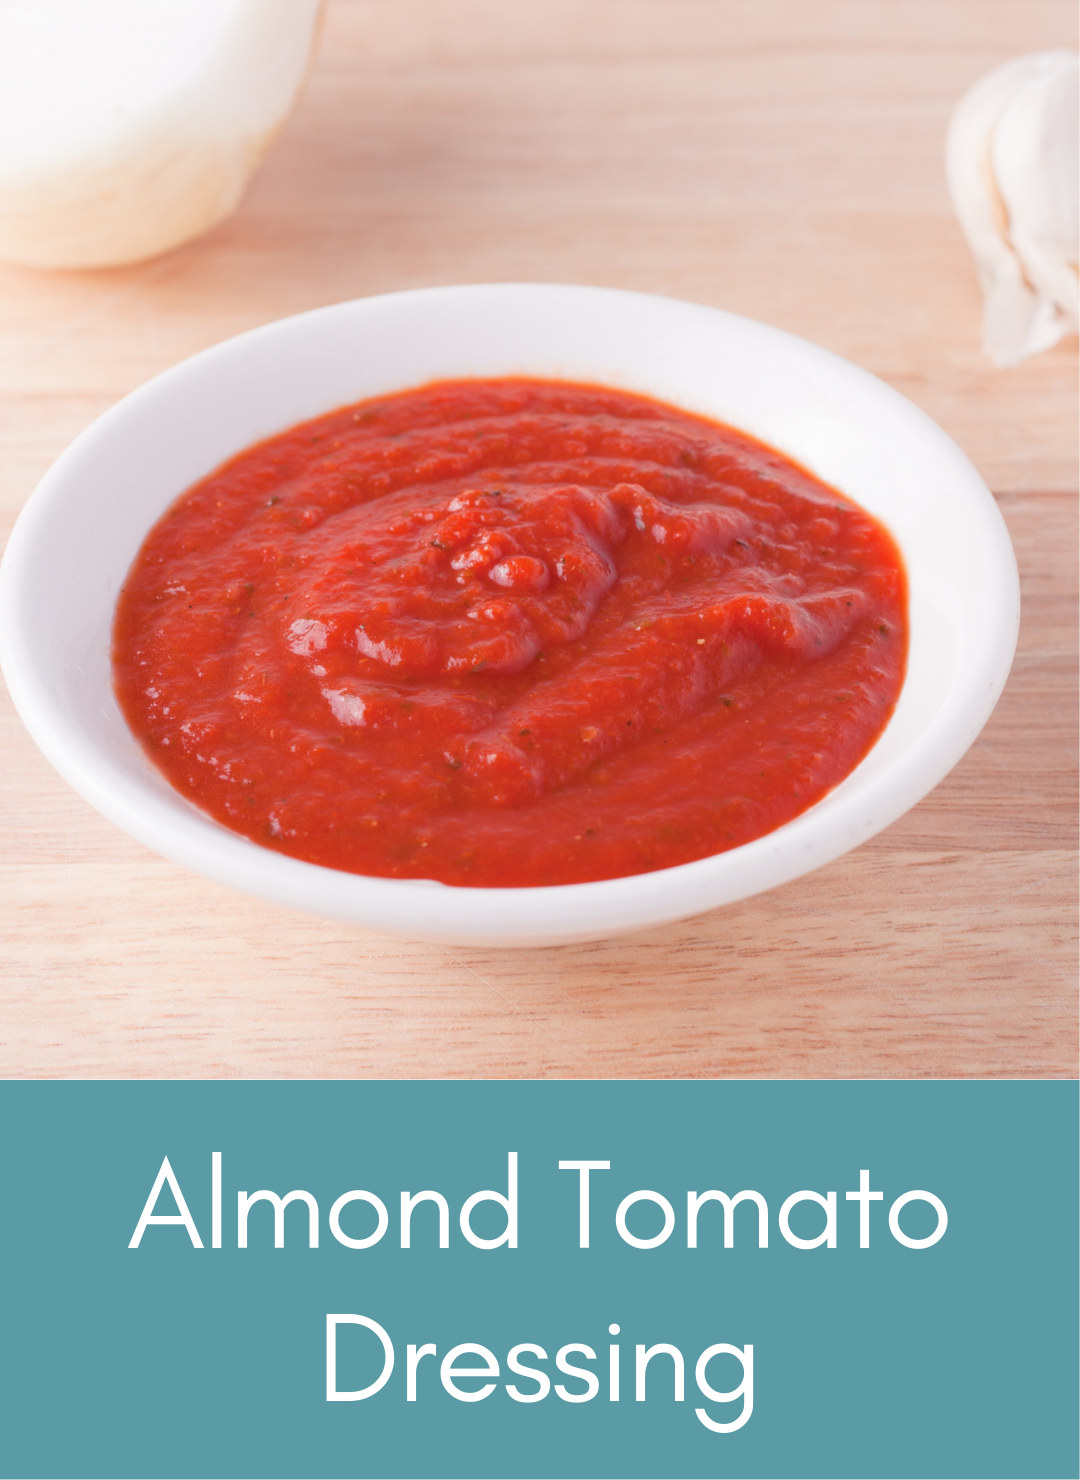 Almond tomato dressing Picture with link to recipe